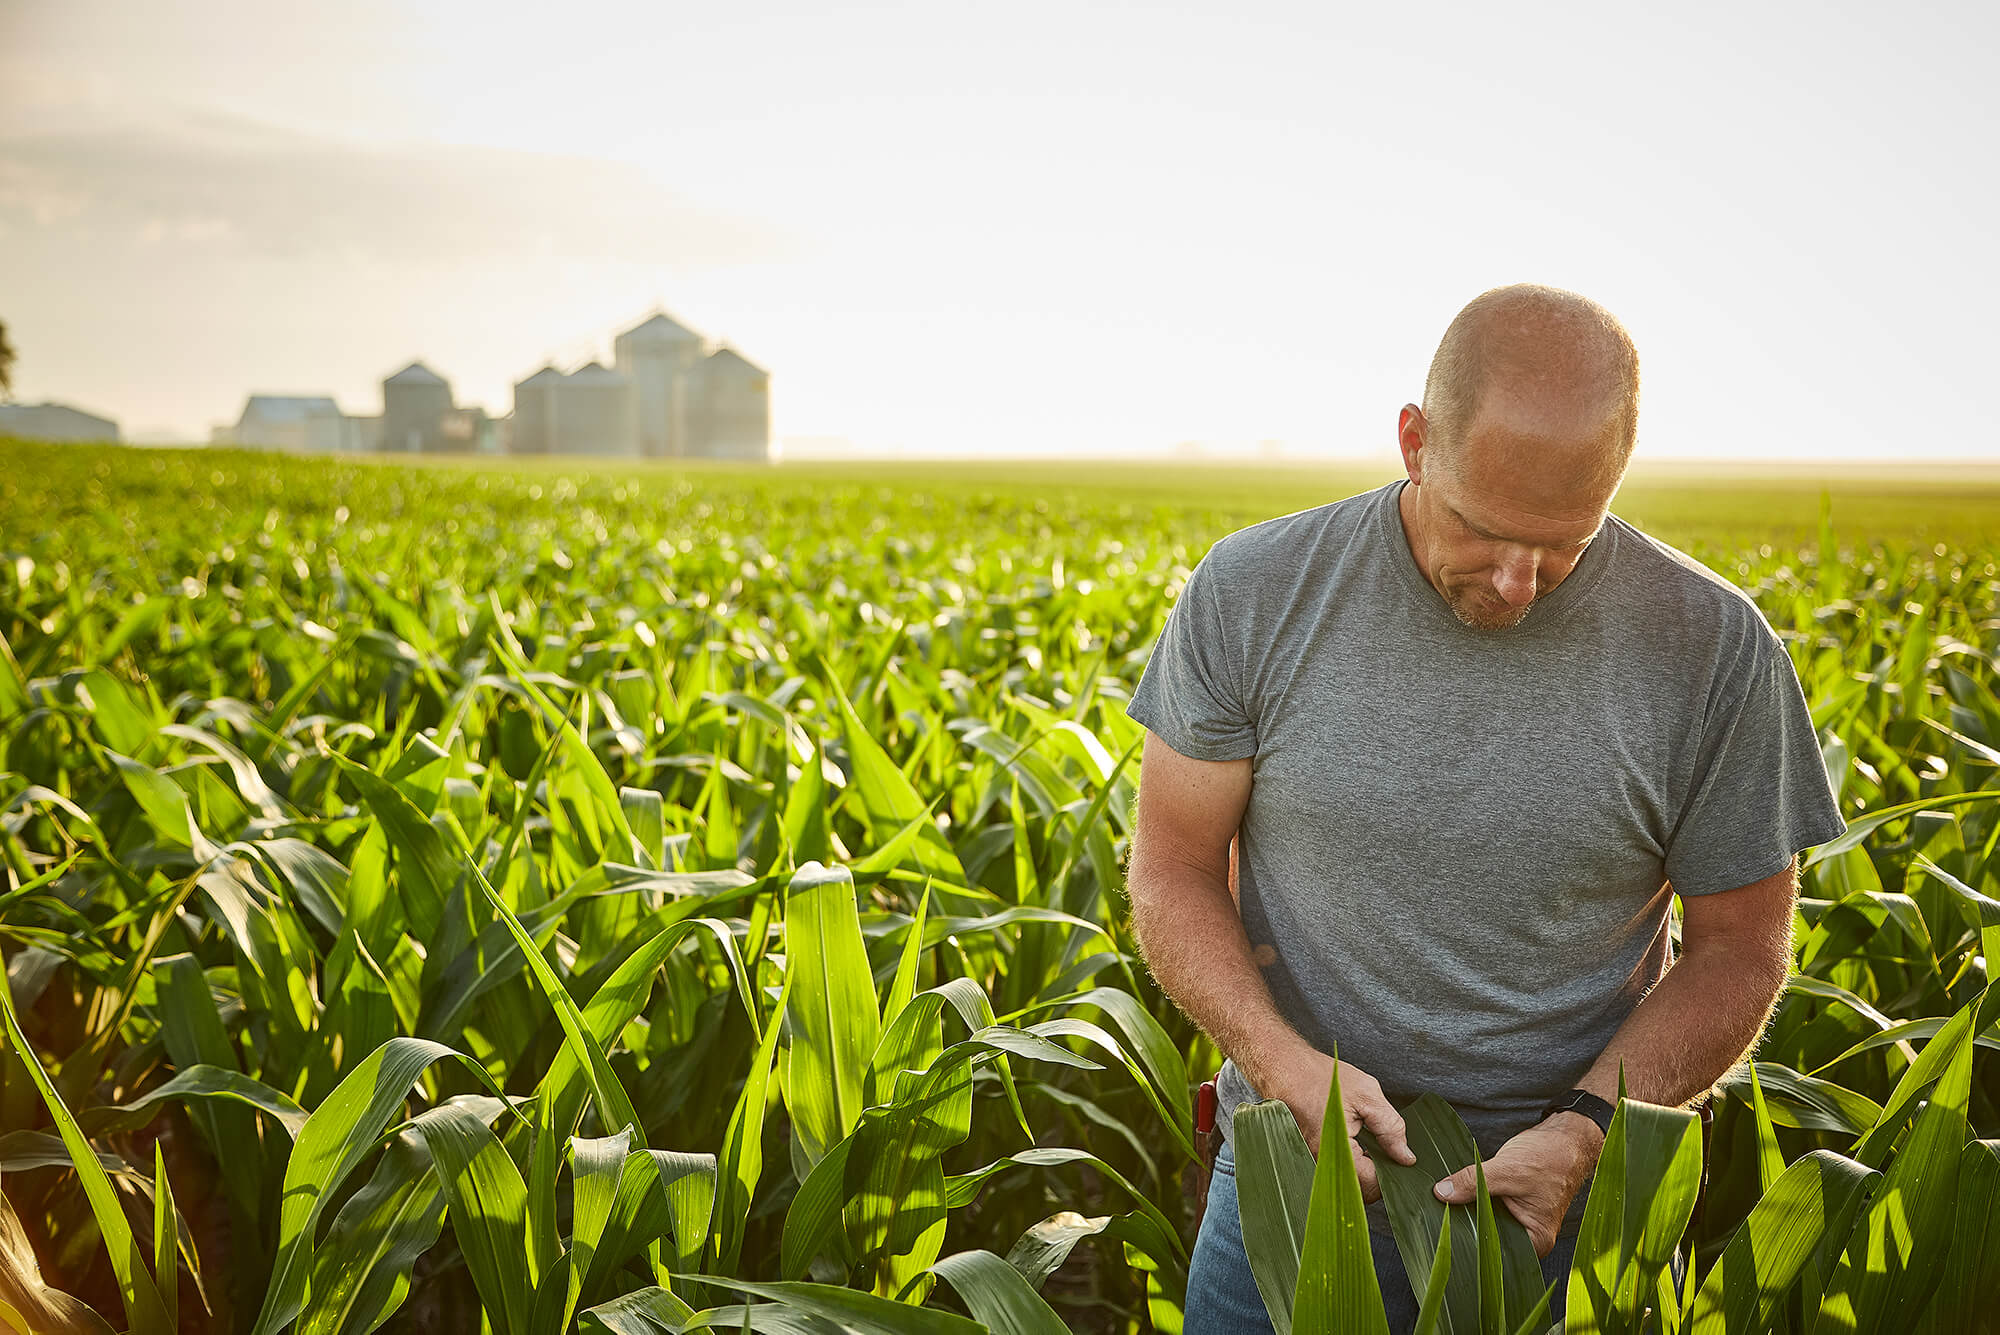 farmer examines corn stalks amid expansive green cornfield, with silos in the background.